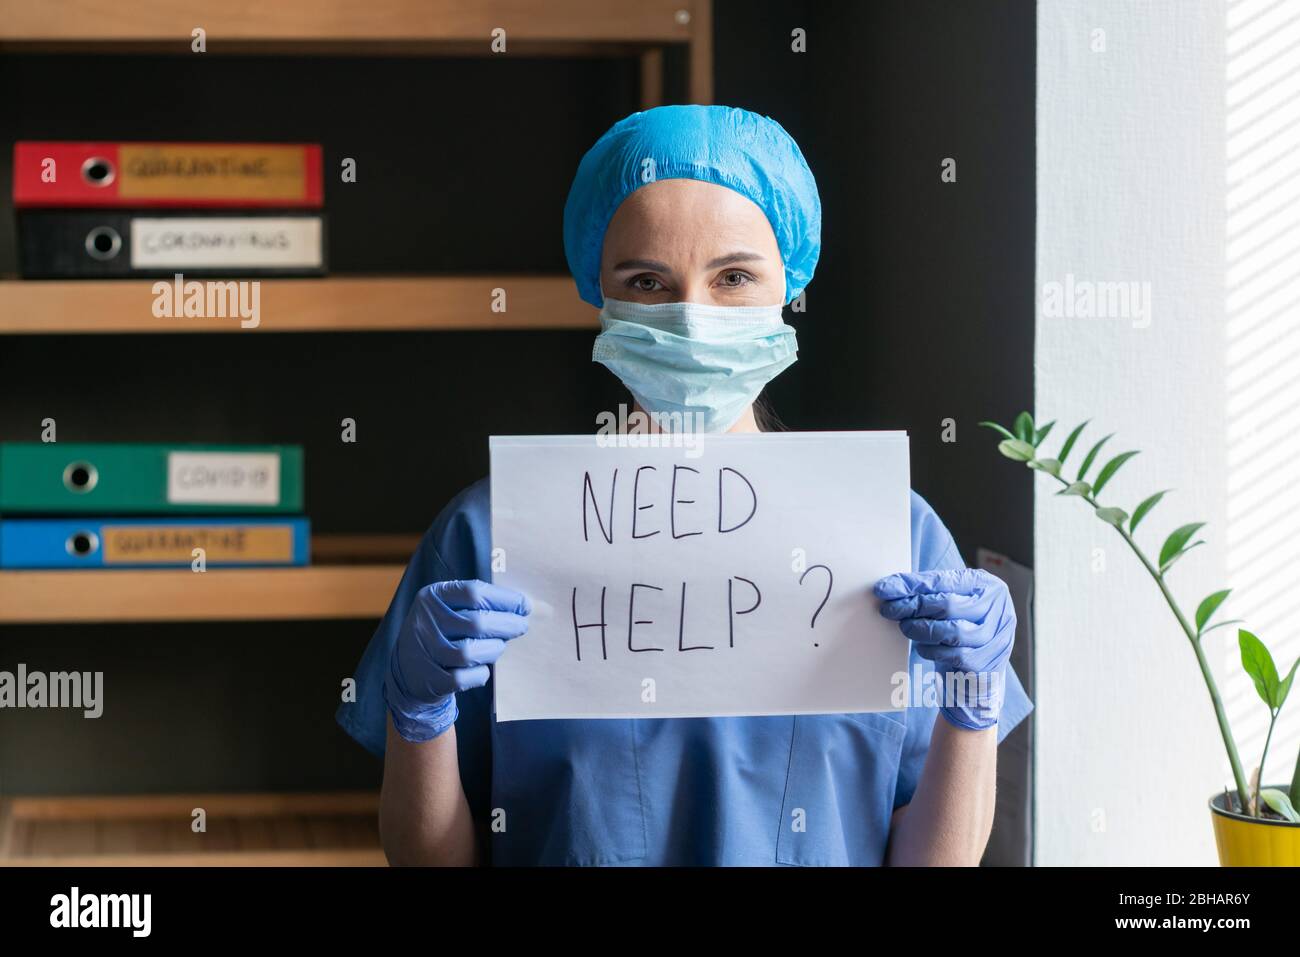 Medic Offering To Help People During Pandemic Stock Photo